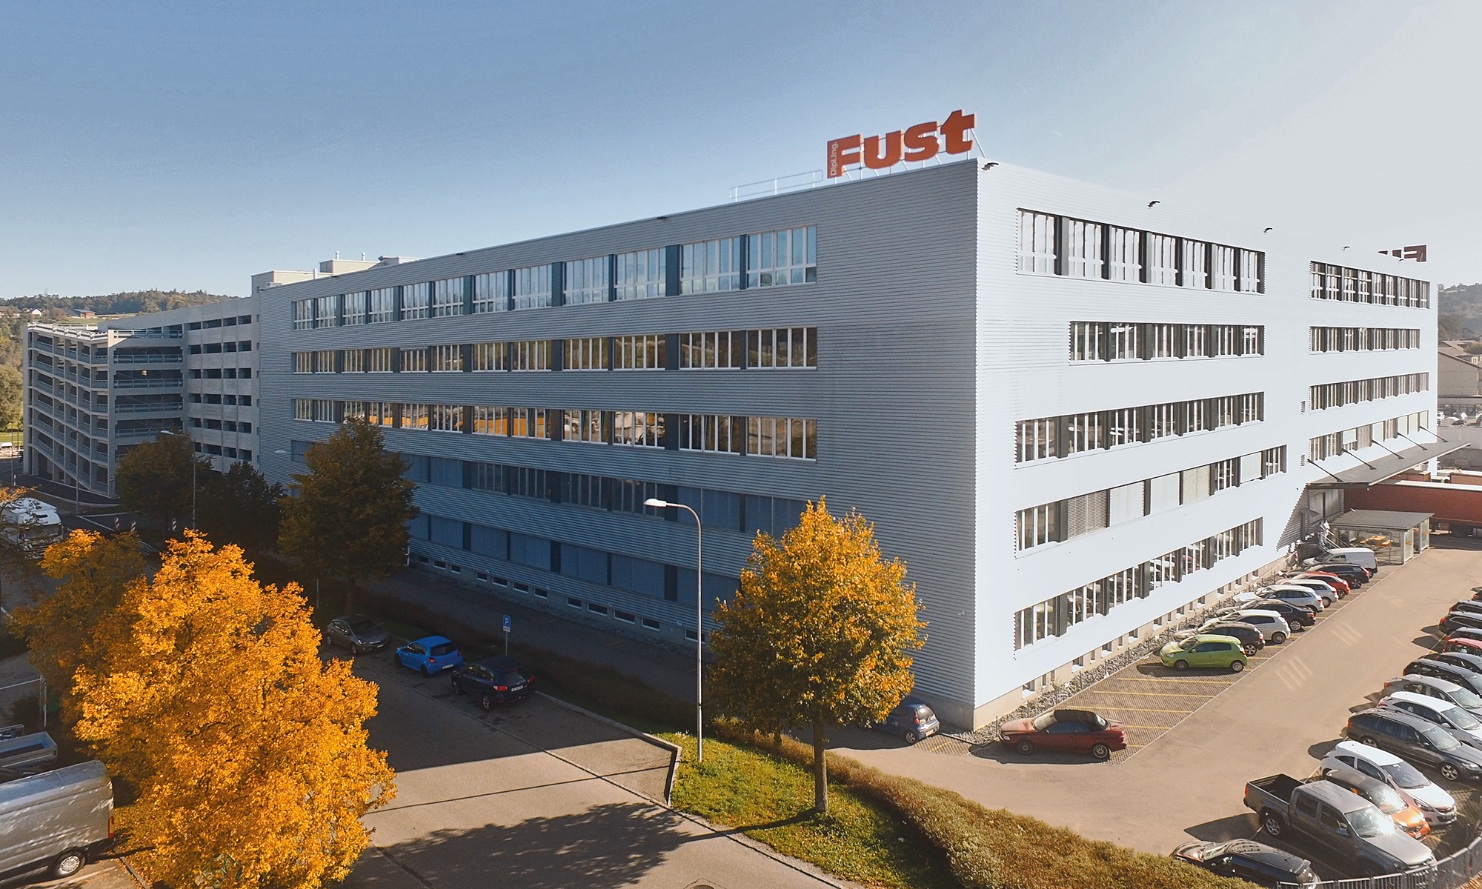 Overall view of the converted Fust logistics centre with new additional storey in wood element construction